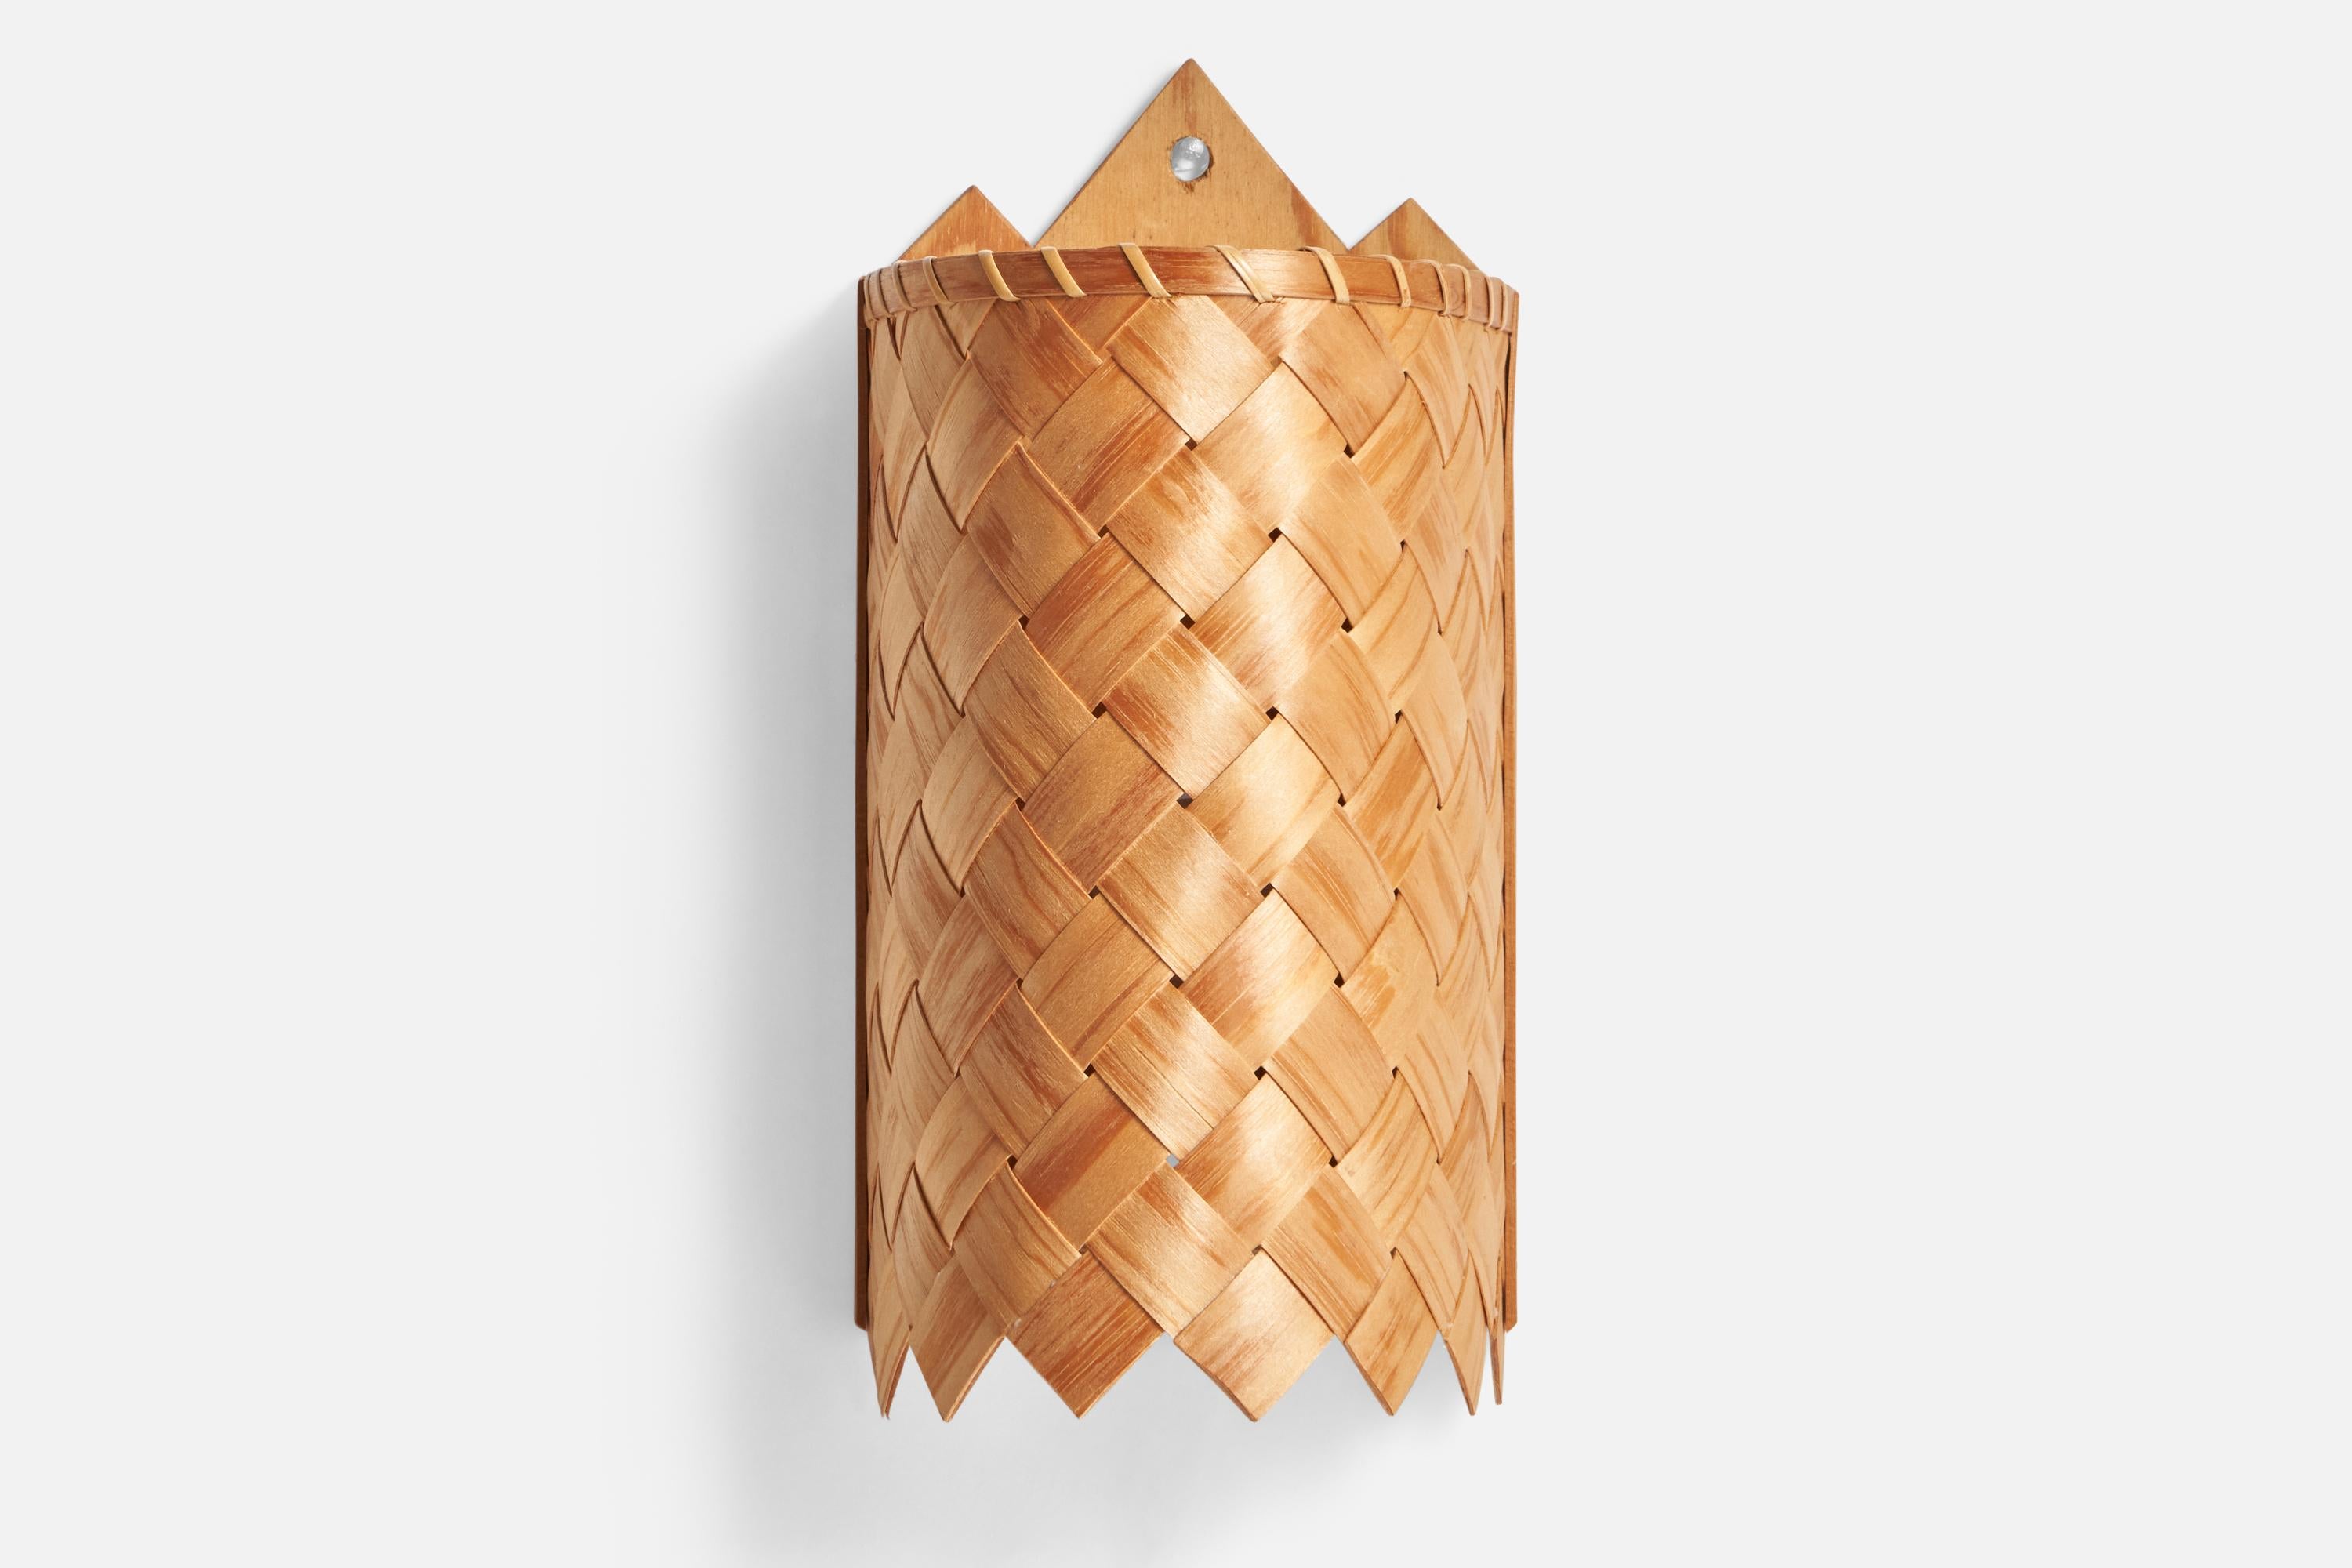 A pine veneer wall light designed and produced by Vämhus Handkluven Spån, Sweden, 1960s.

Overall Dimensions (inches): 11.8” H x 5.8” W x 4.75” D
Back Plate Dimensions (inches): n/a
Bulb Specifications: E-14 Bulb
Number of Sockets: 1
All lighting